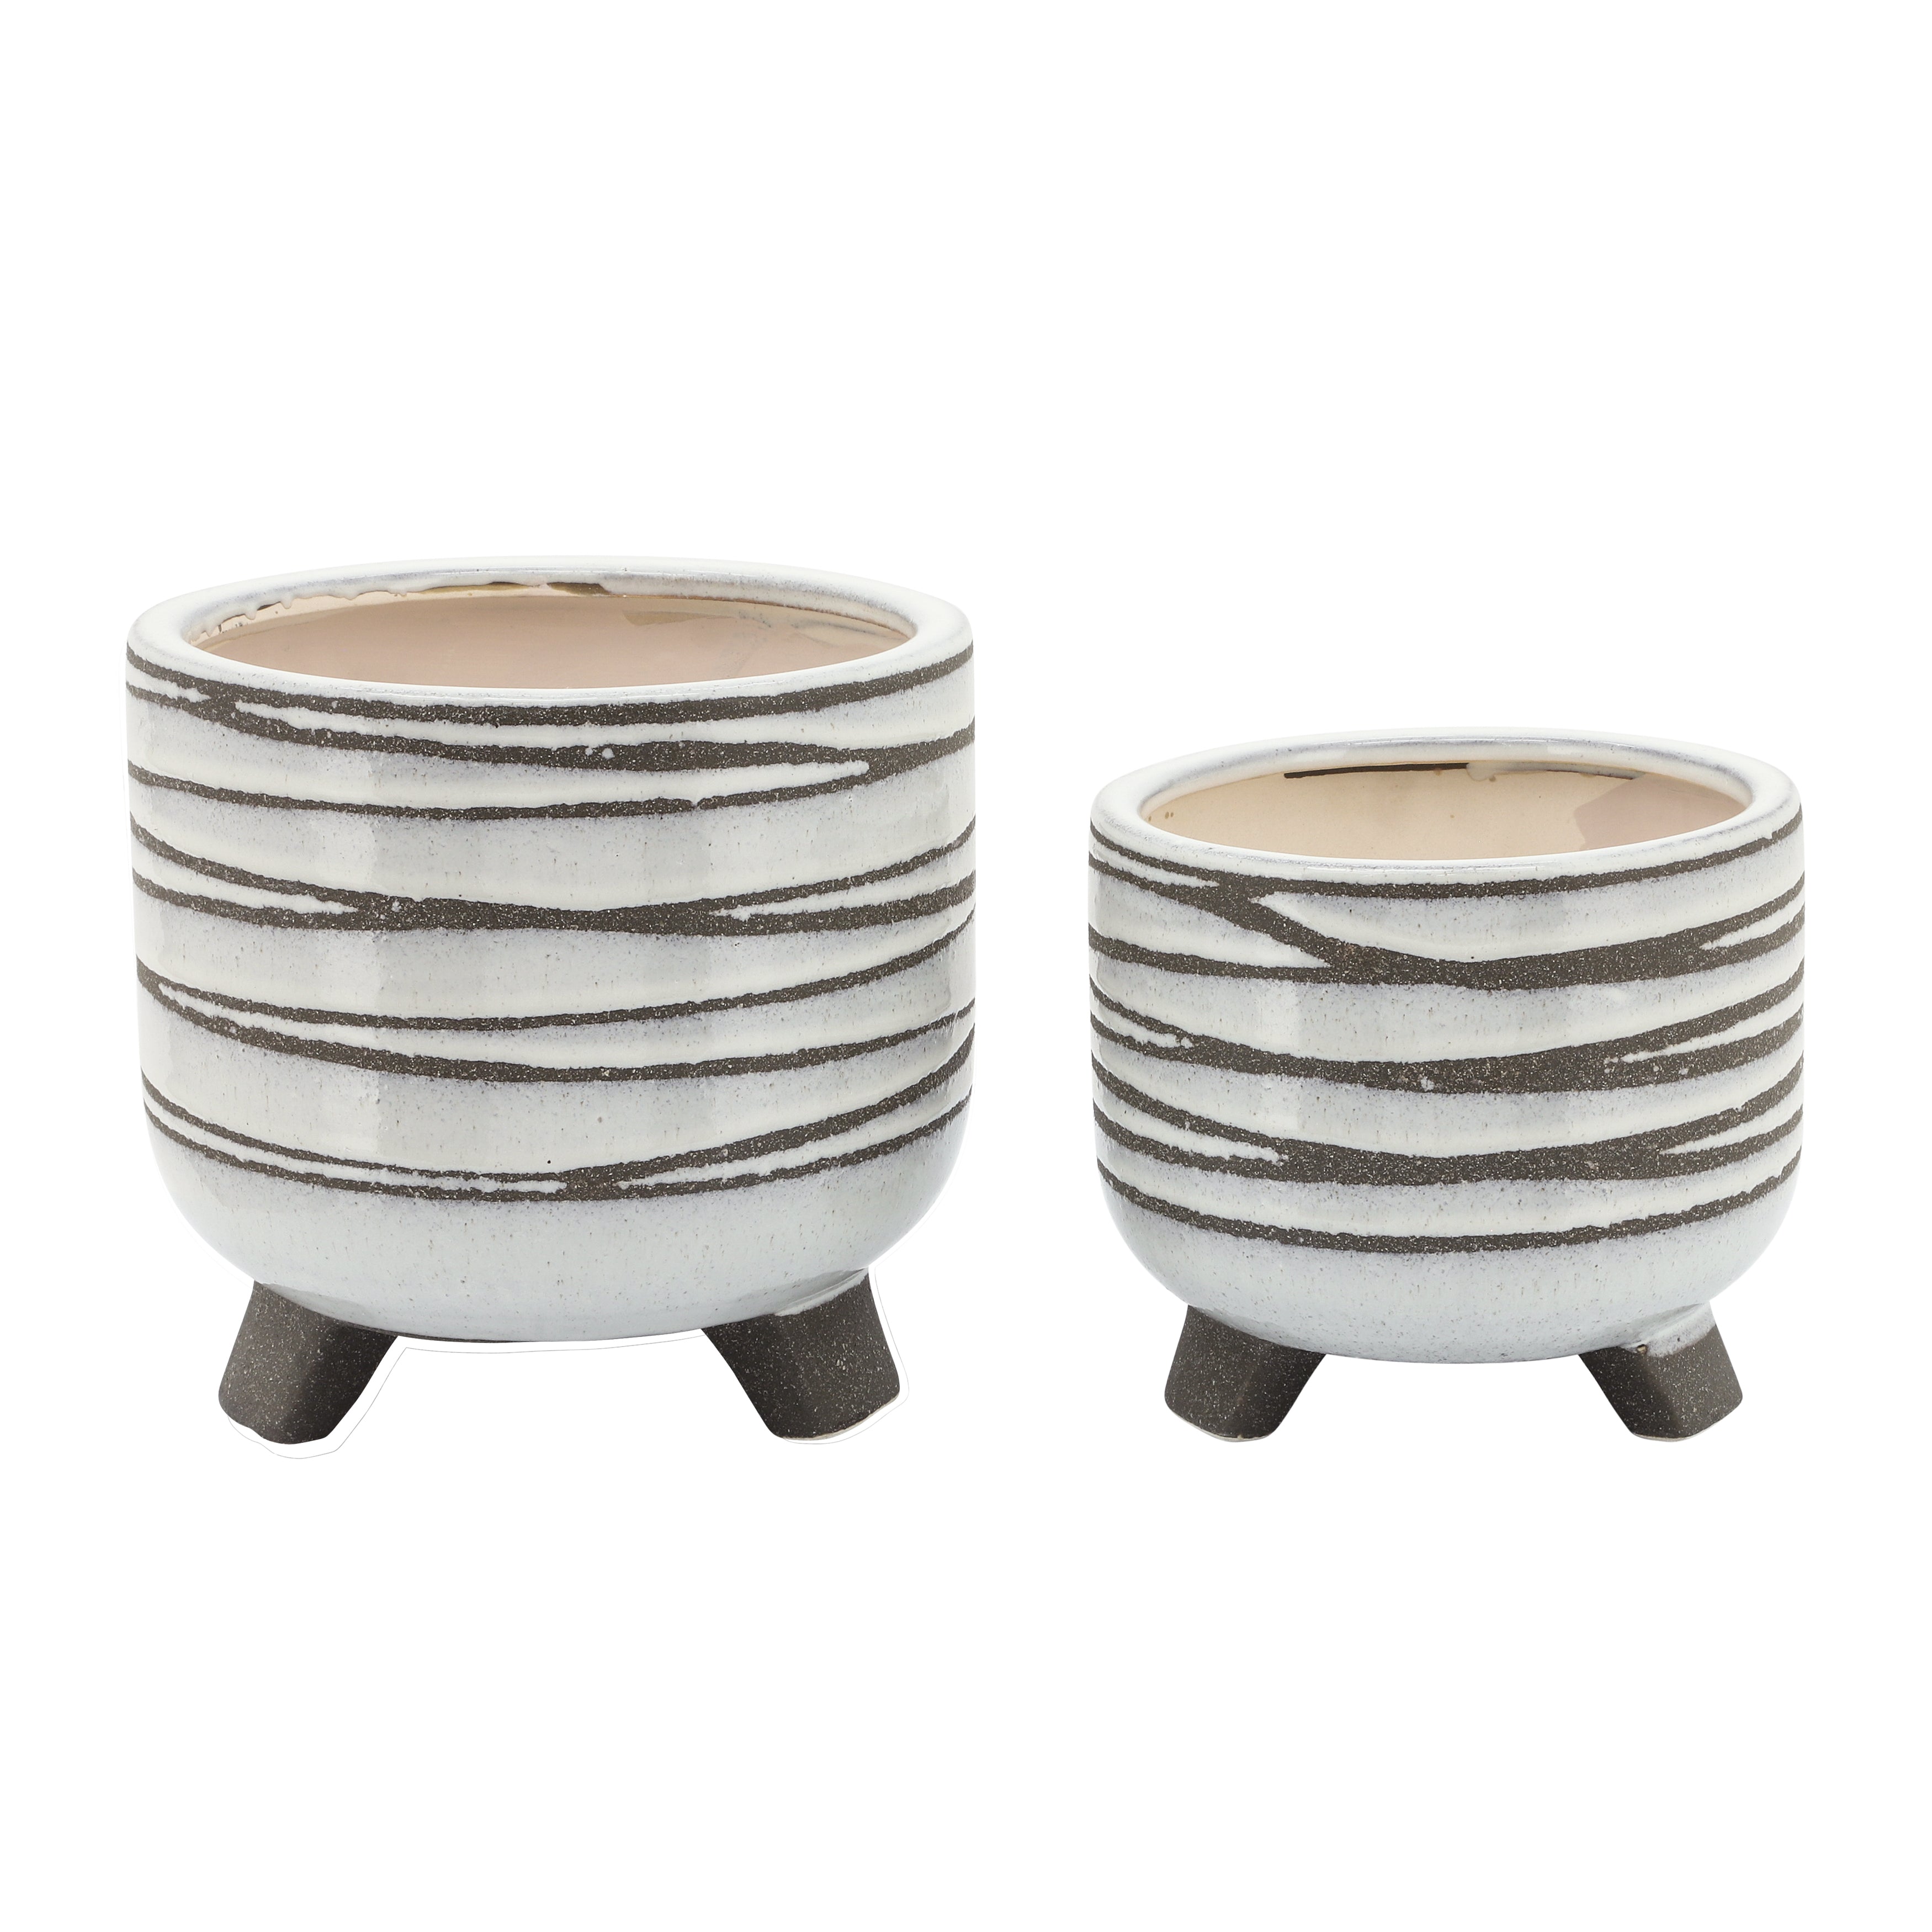 Set of 2 Ceramic Footed Planters, White, Planters